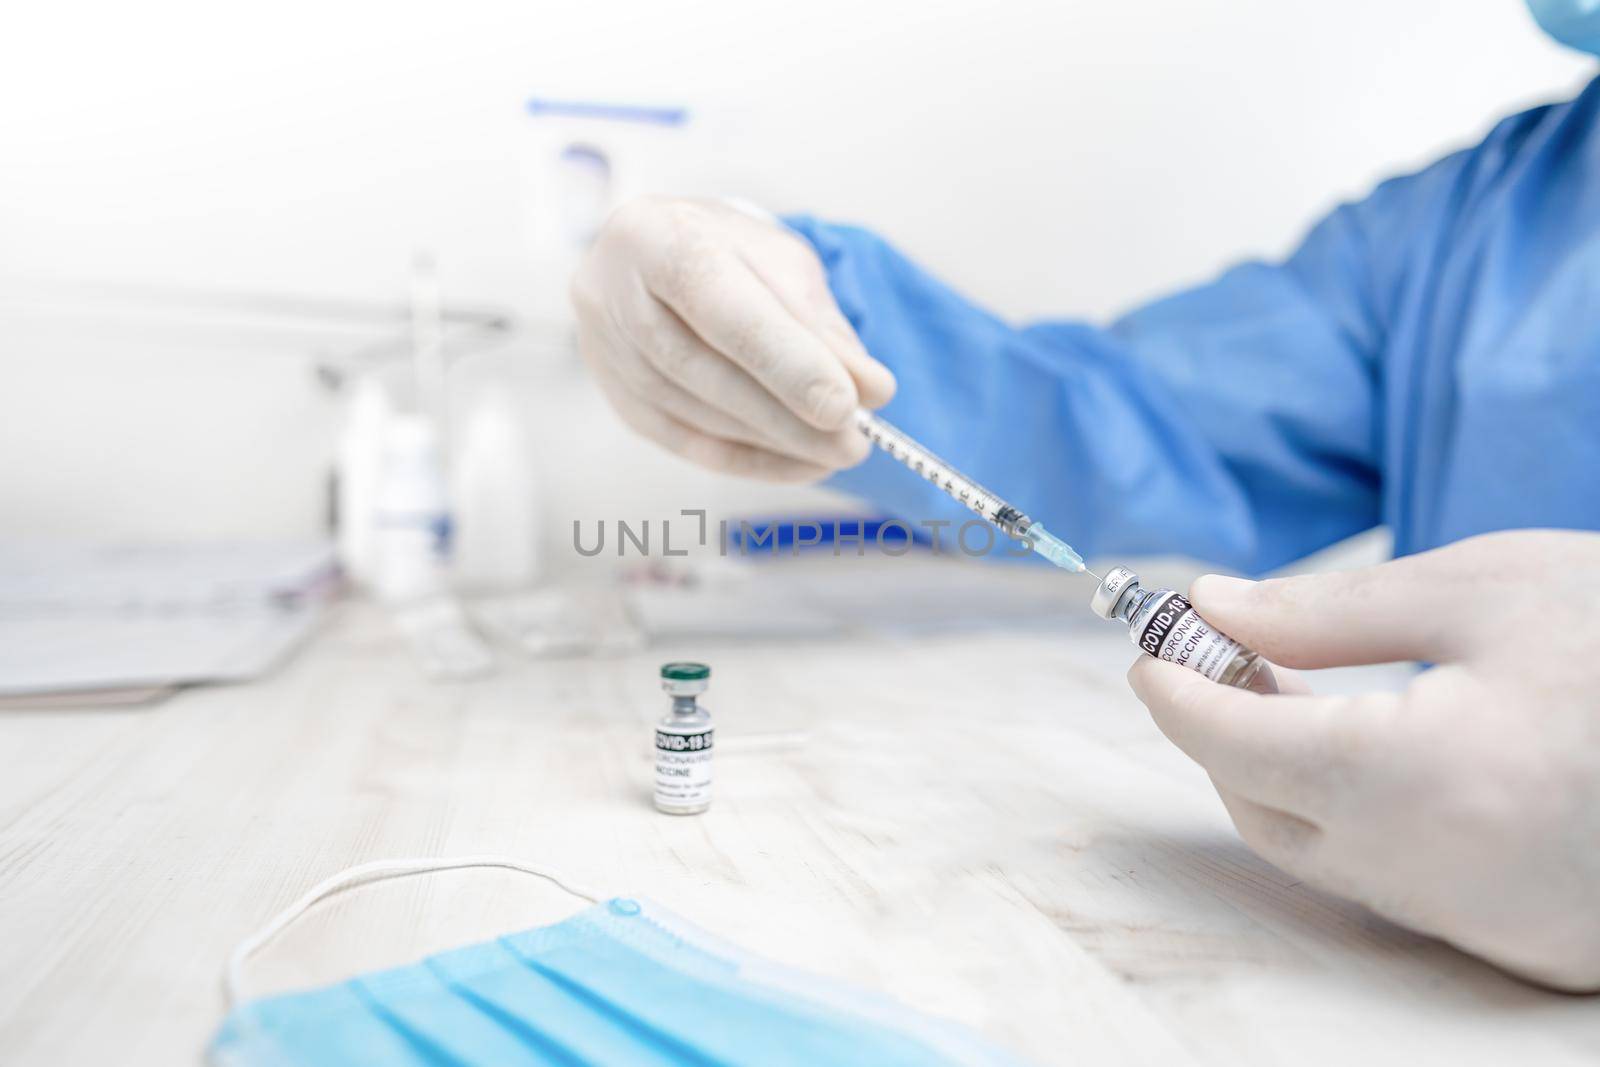 Hands close-up shot of senior doctor, nurse or healthcare worker in personal protective kit sitting at hospital or health clinic desk preparing syringe for vaccination amid Coronavirus or Covid-19